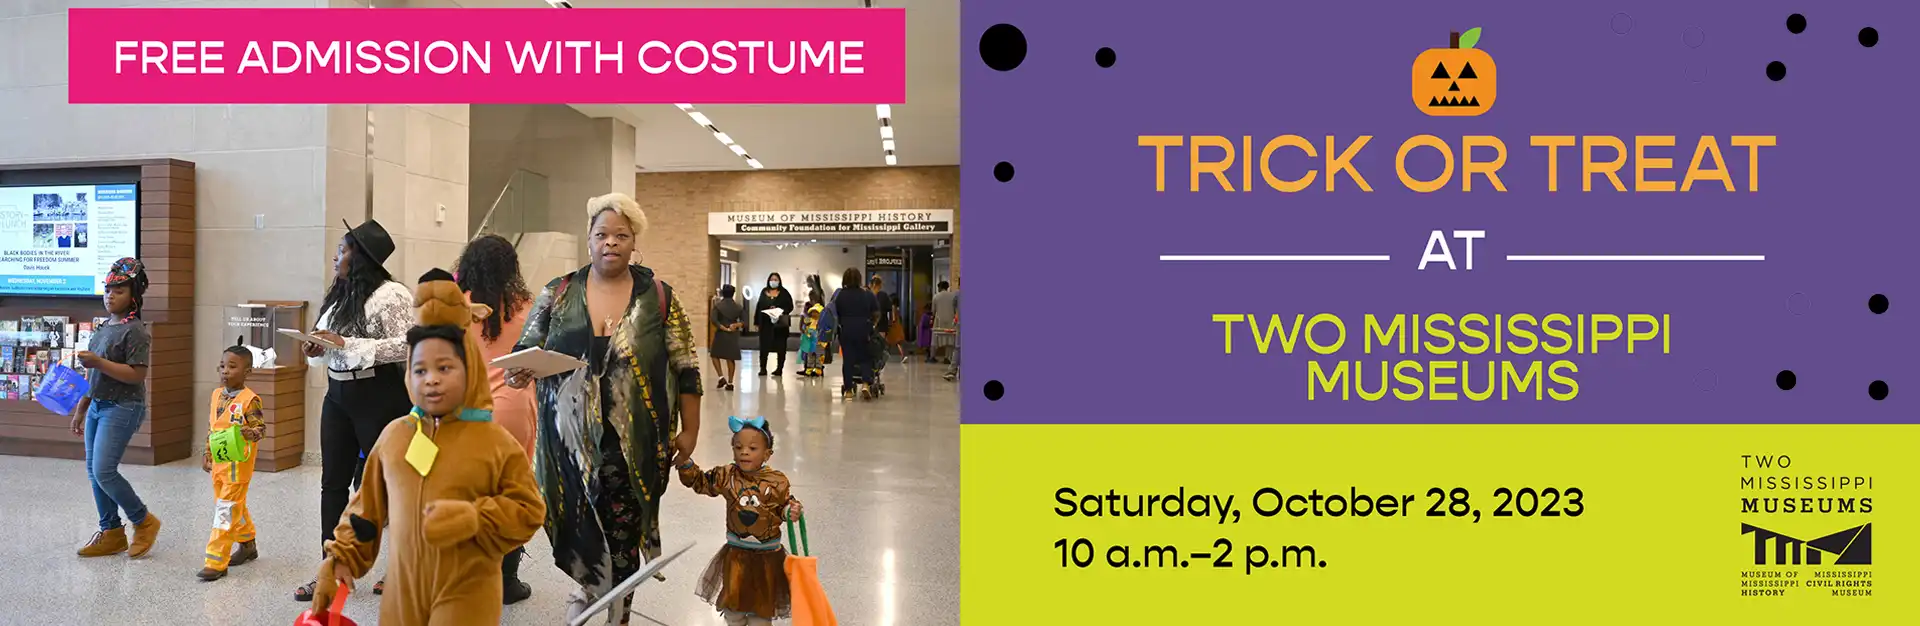 Trick or Treat, October 28, 2023 at the Two Mississippi Museums